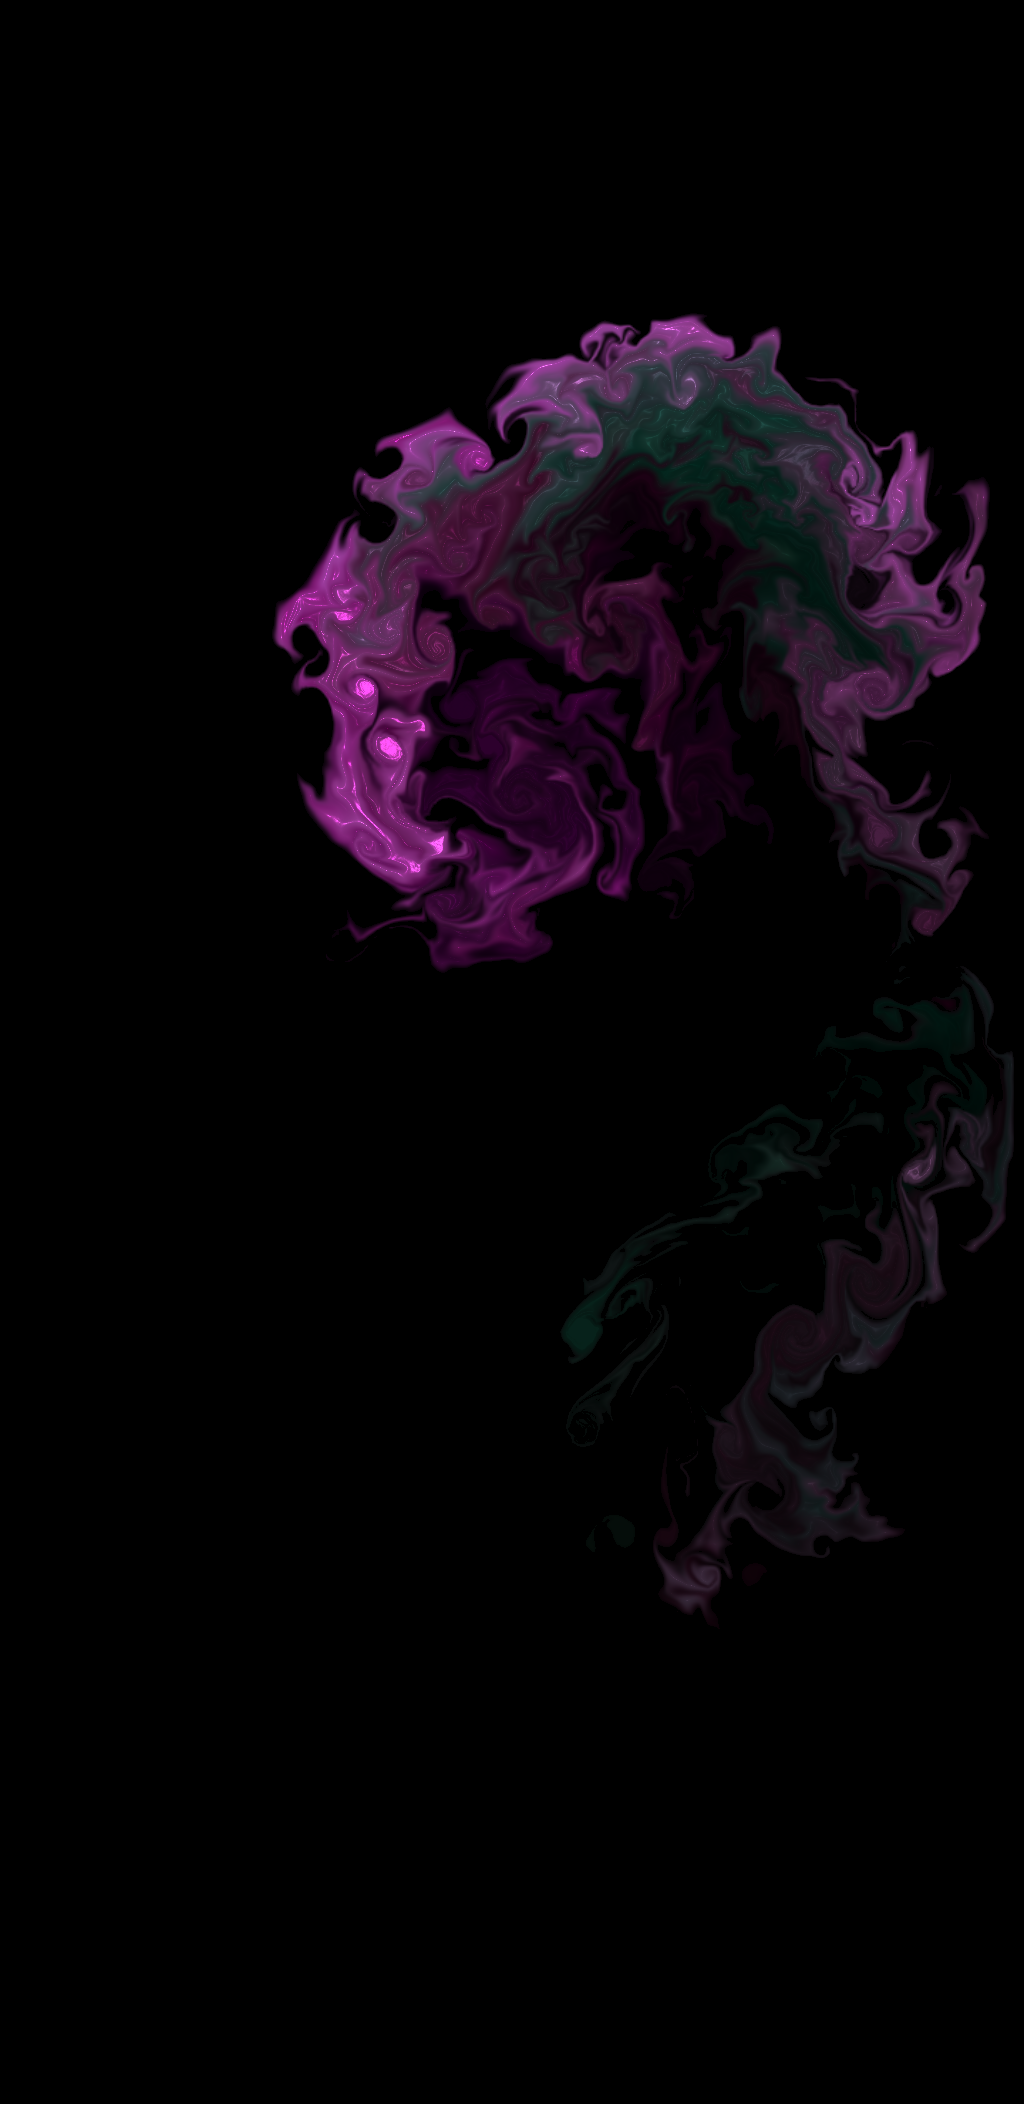 Found an app to make your own fluid AMOLED wallpaper with the fluid app on Android. link in comments